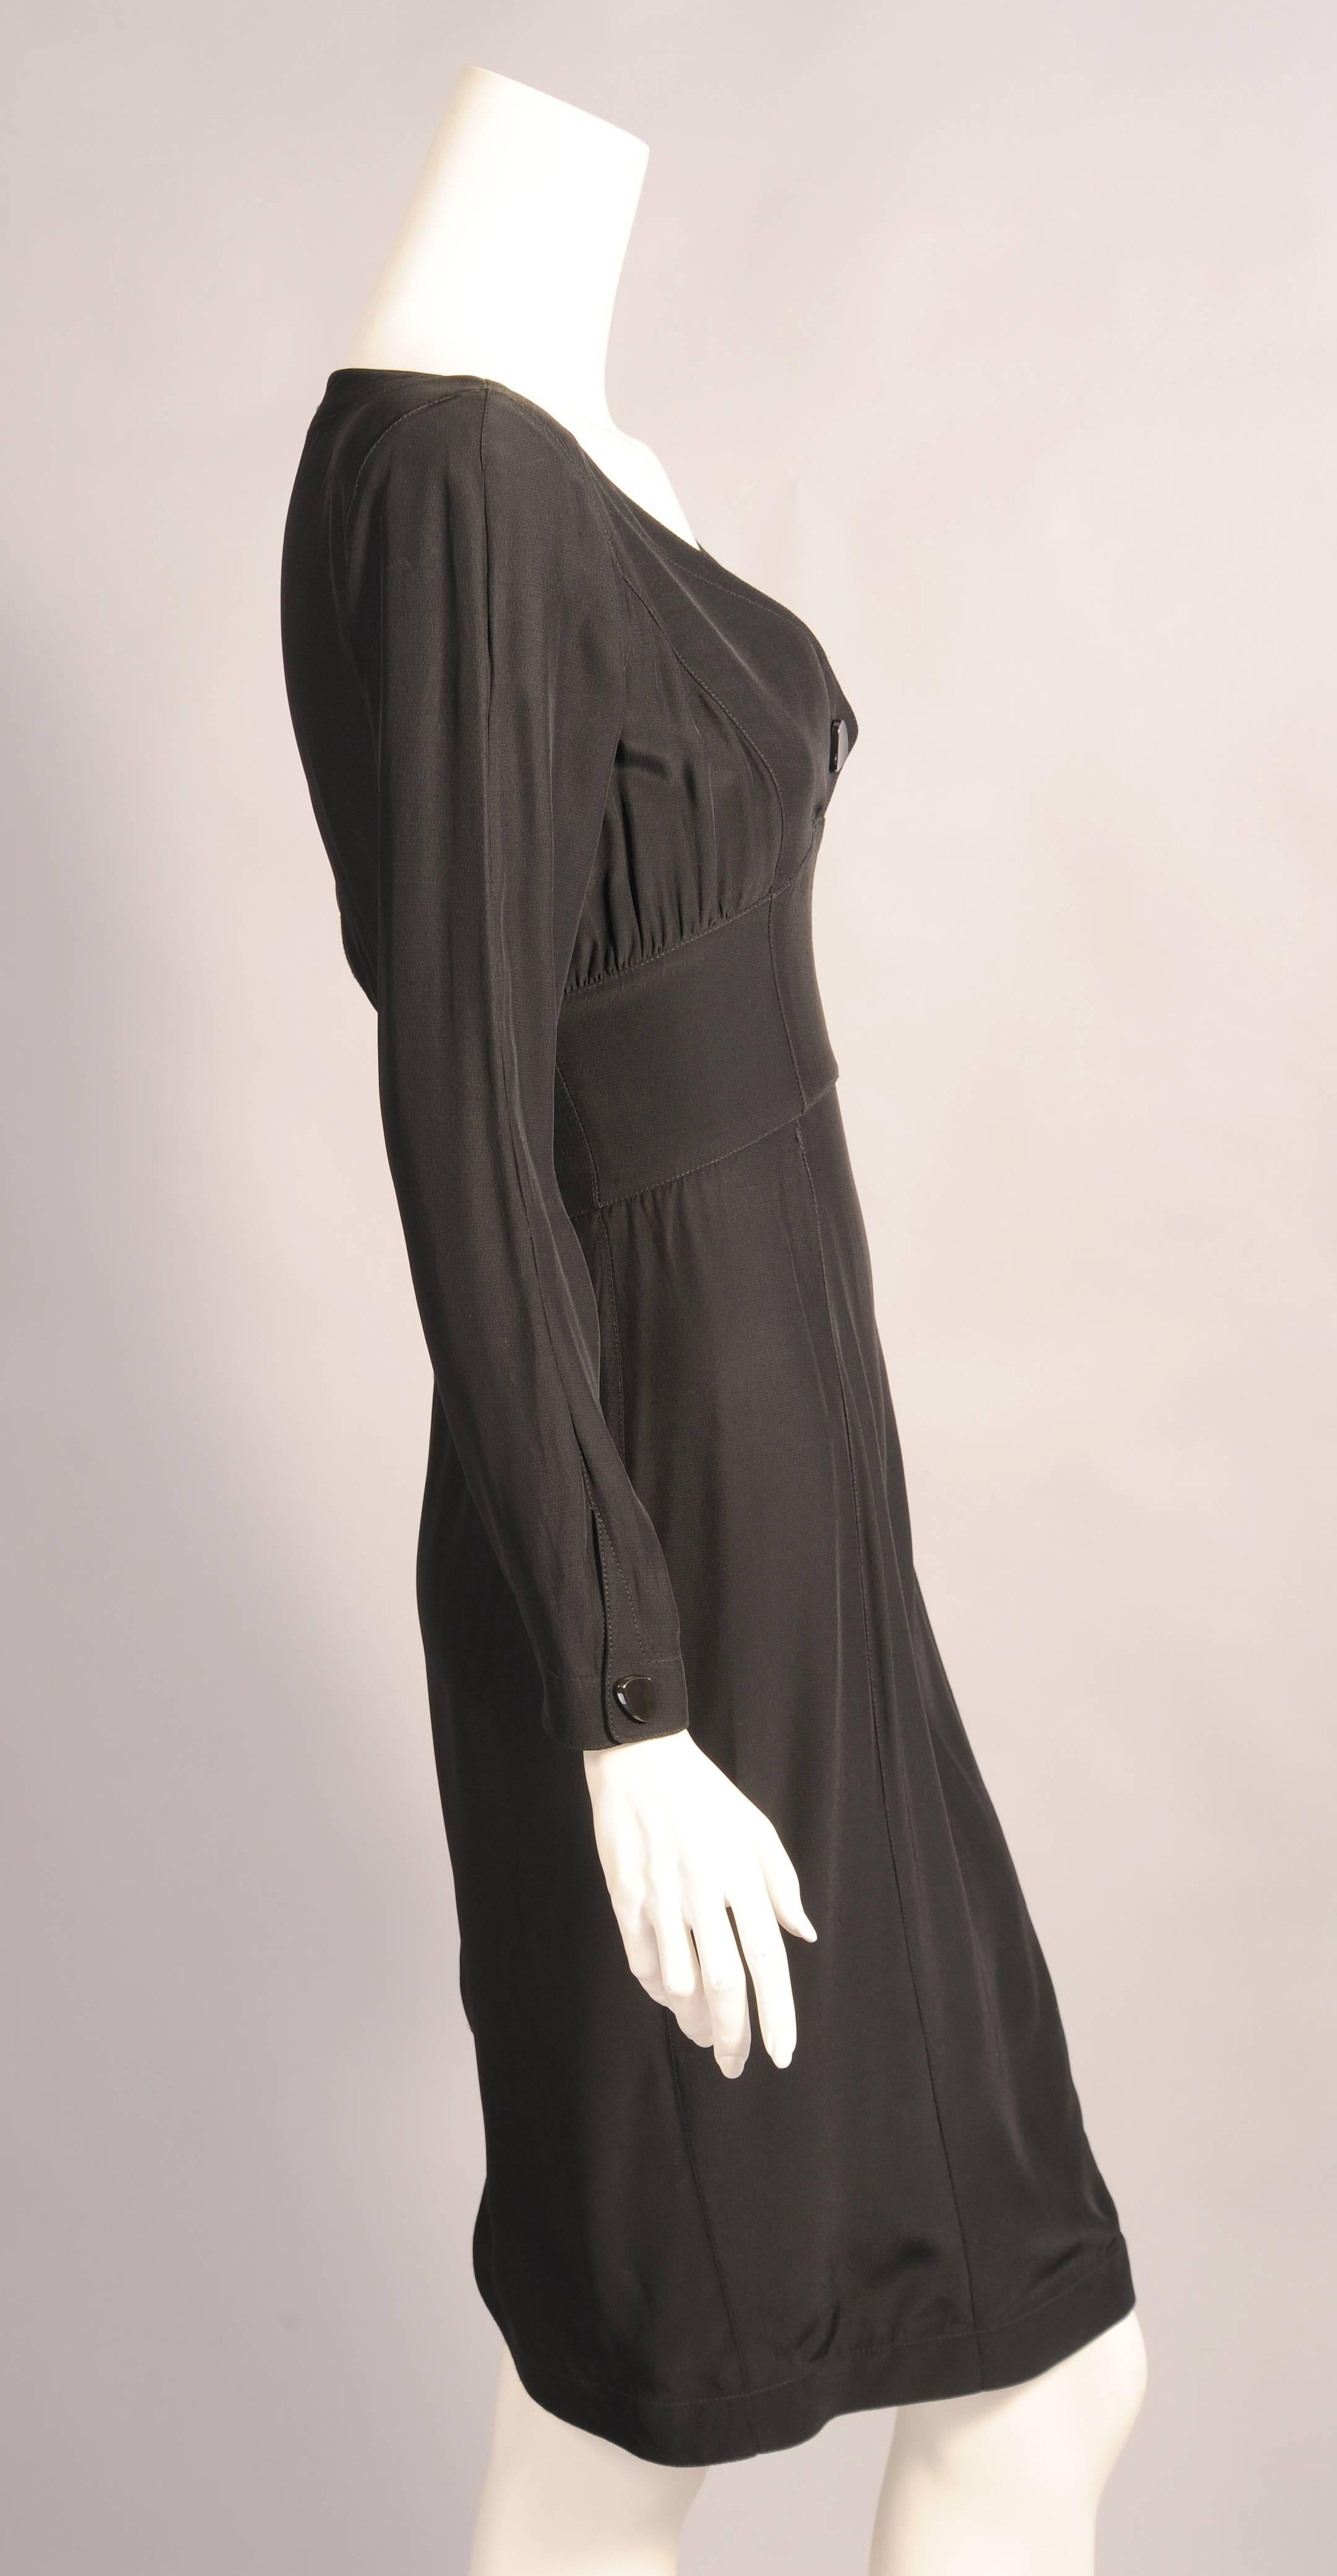 Thierry Mugler Black Button Back Dress In Excellent Condition For Sale In New Hope, PA